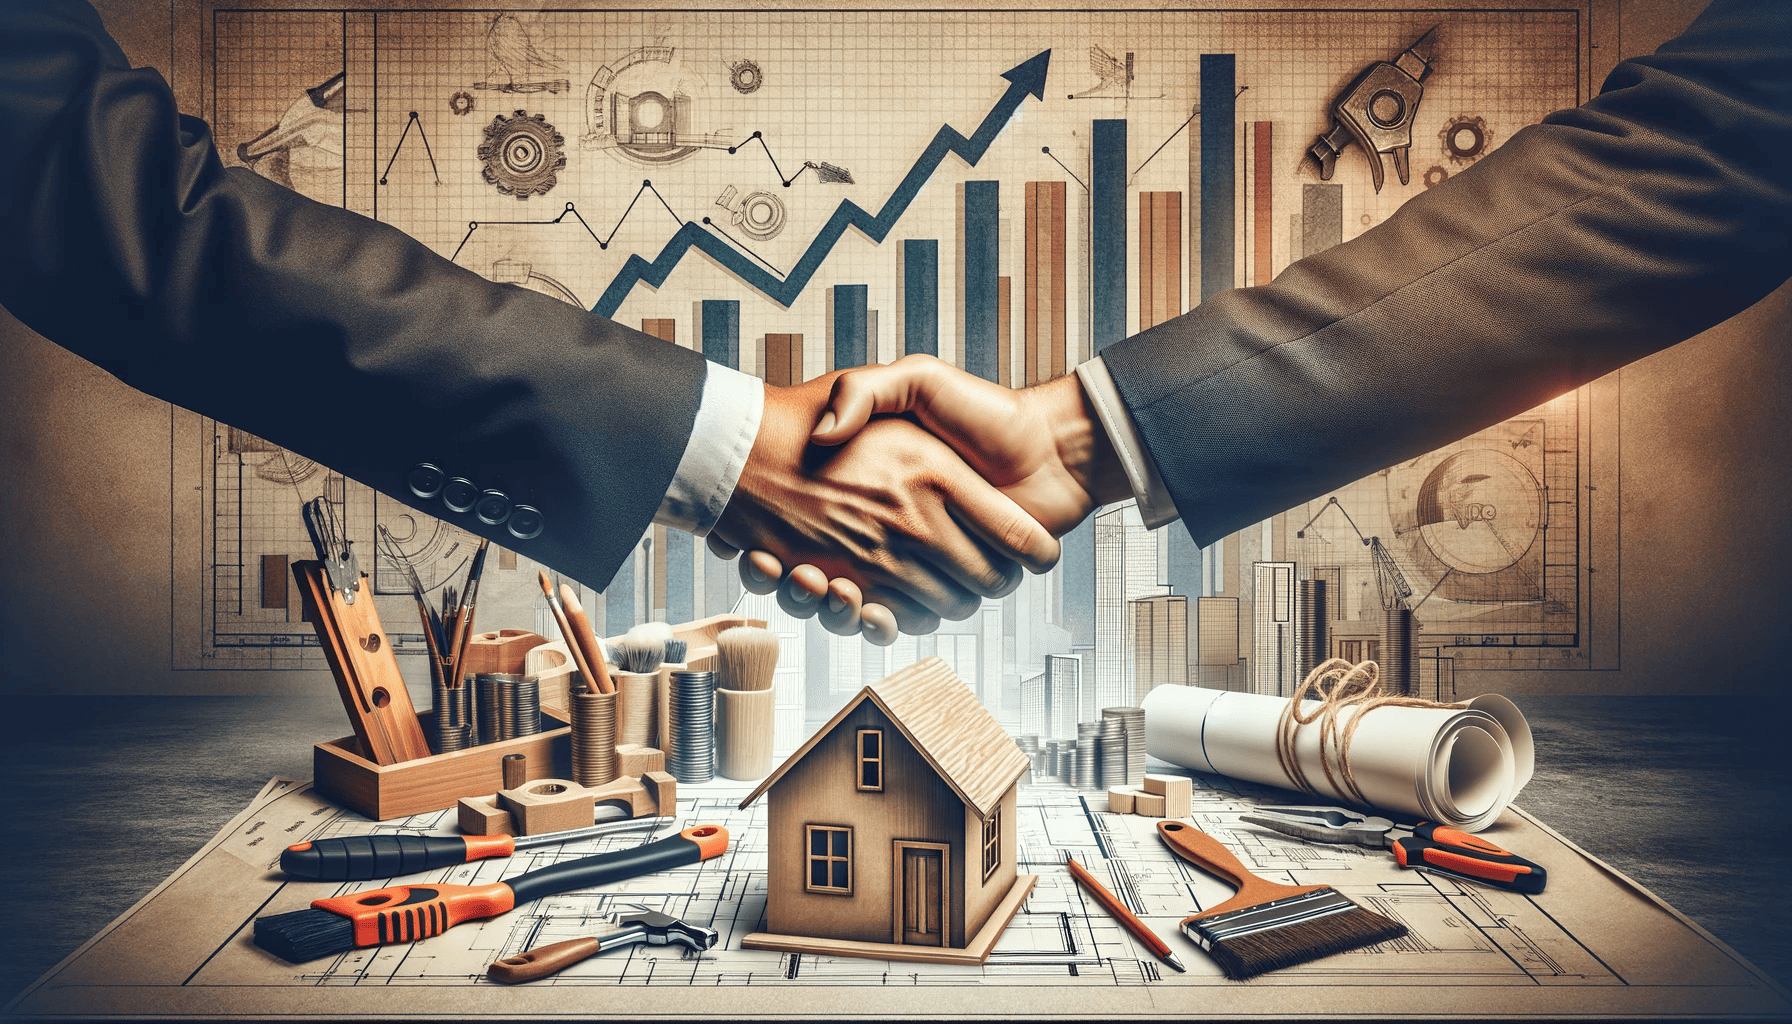 A conceptual image that symbolizes the real estate industry and construction The main focus is a firm handshake between two individuals dressed in business suits